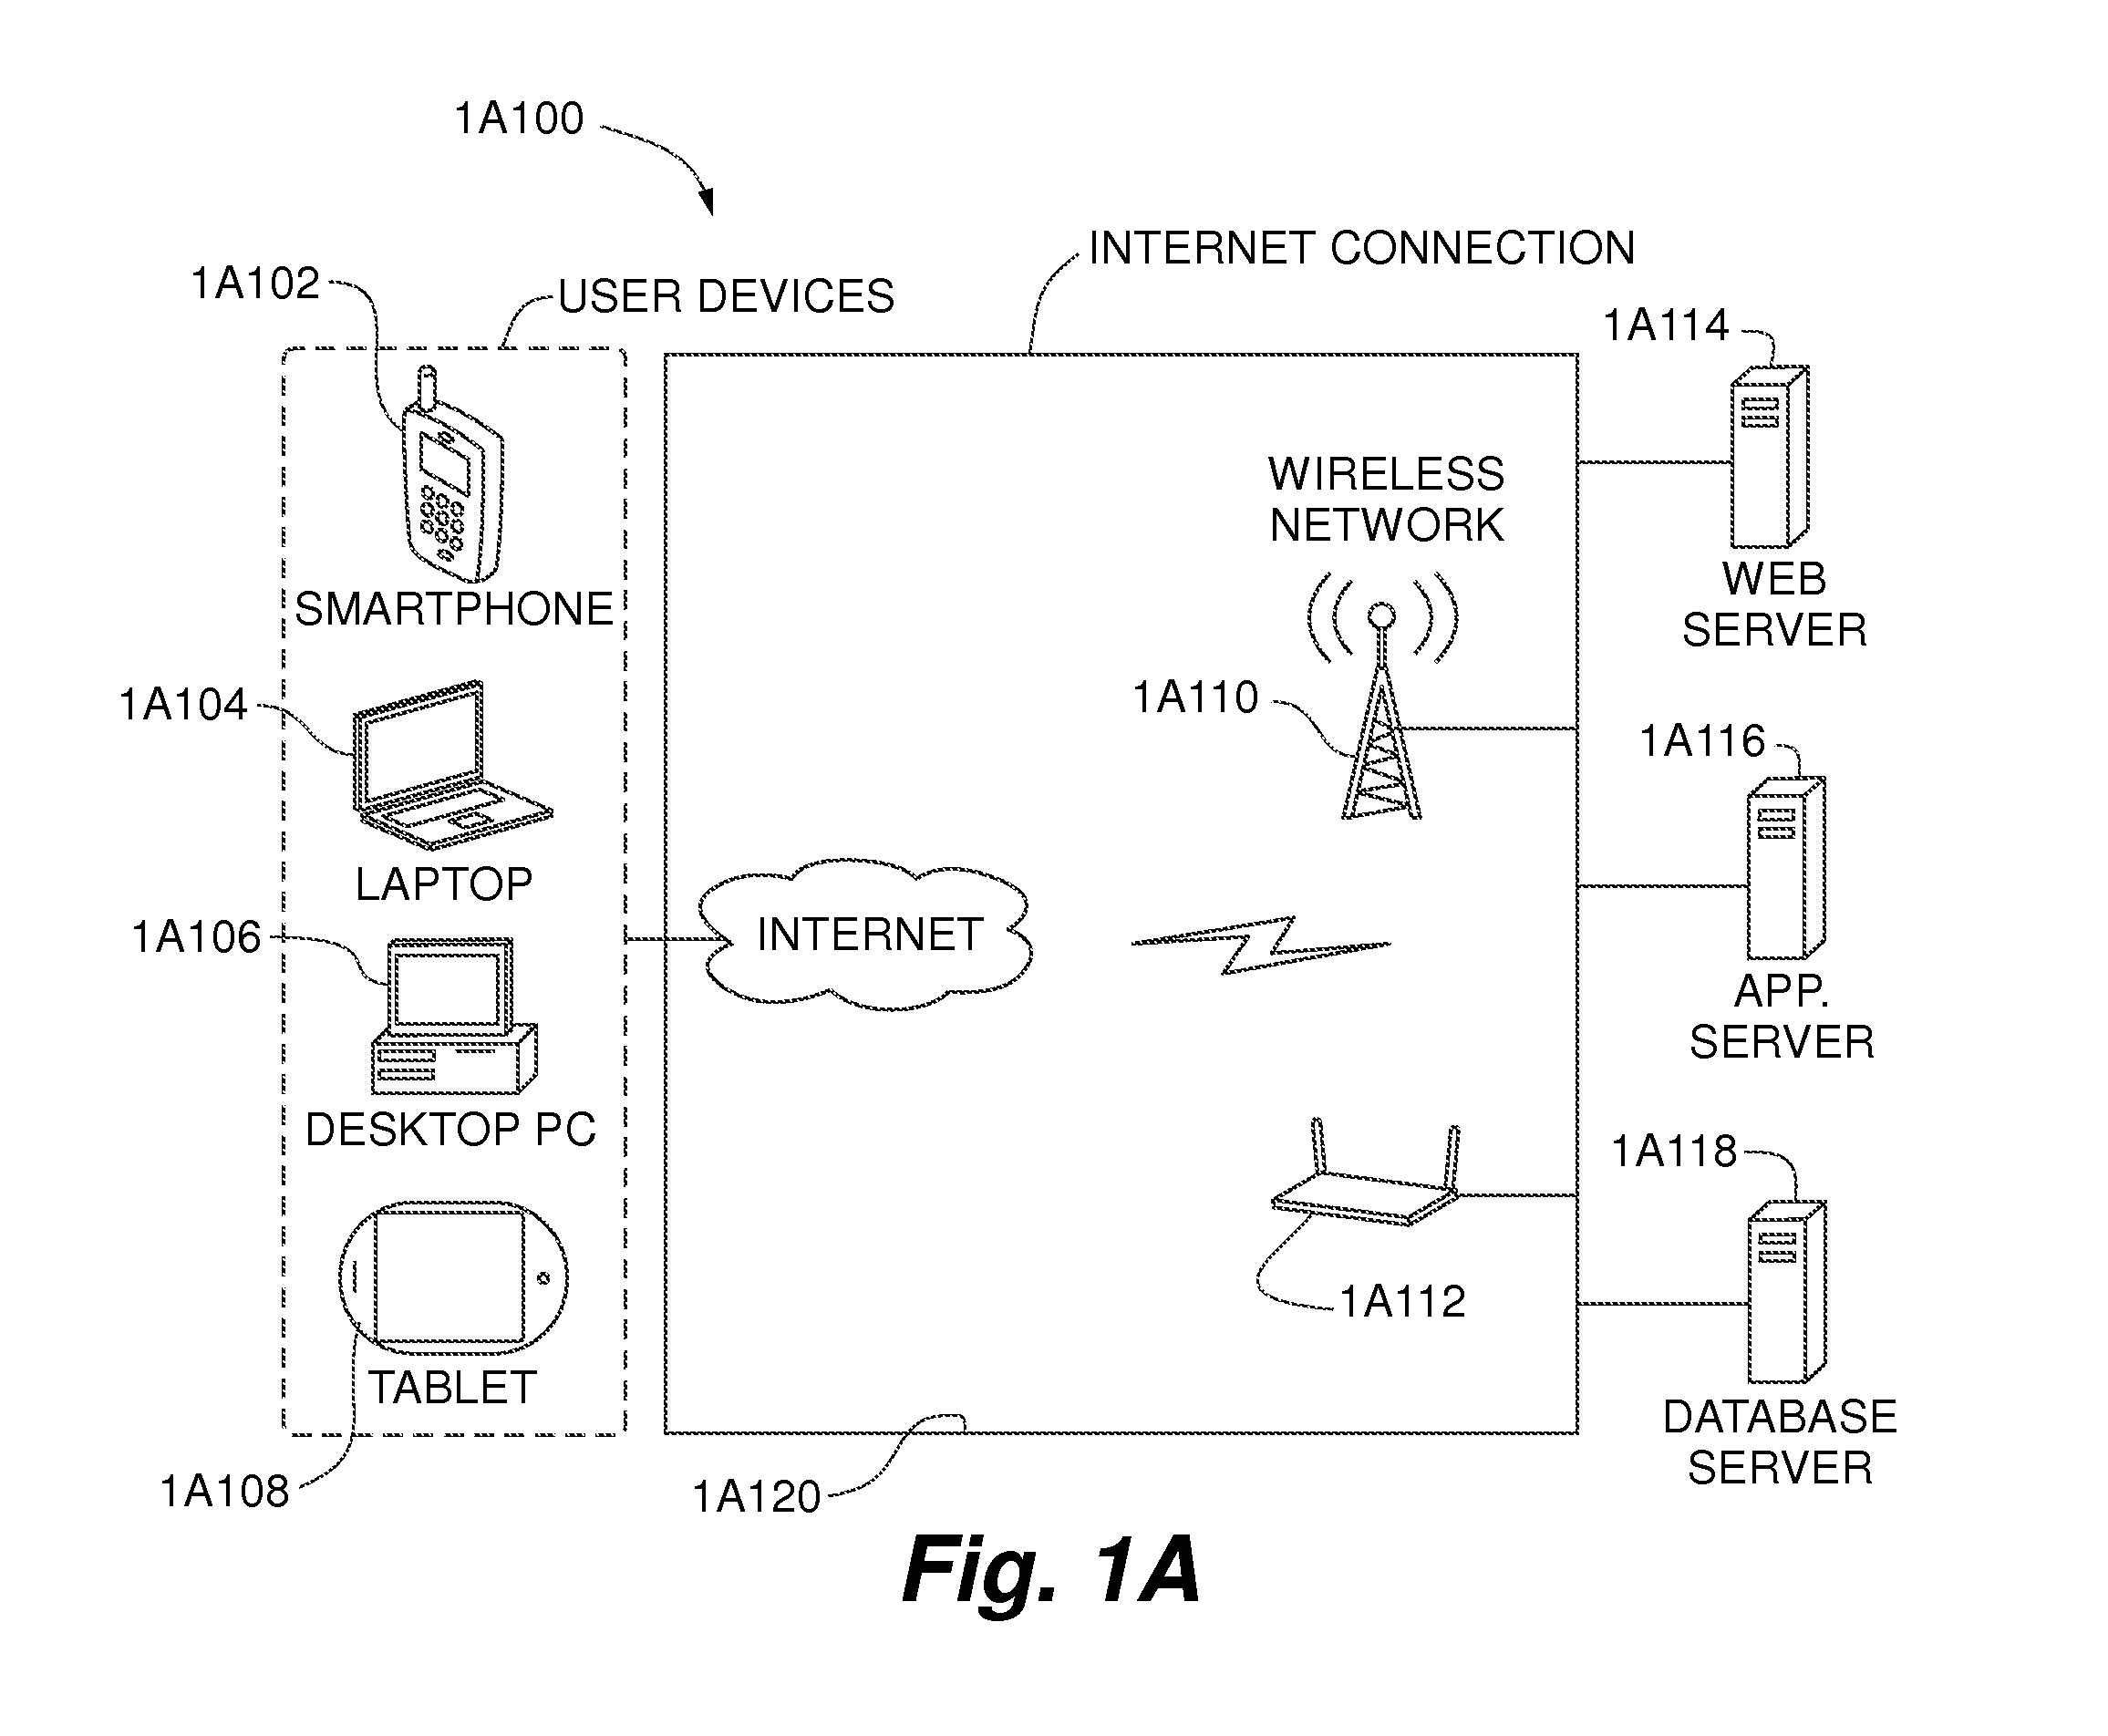 Systems and methods for automatically creating a photo-based project based on photo analysis and image metadata